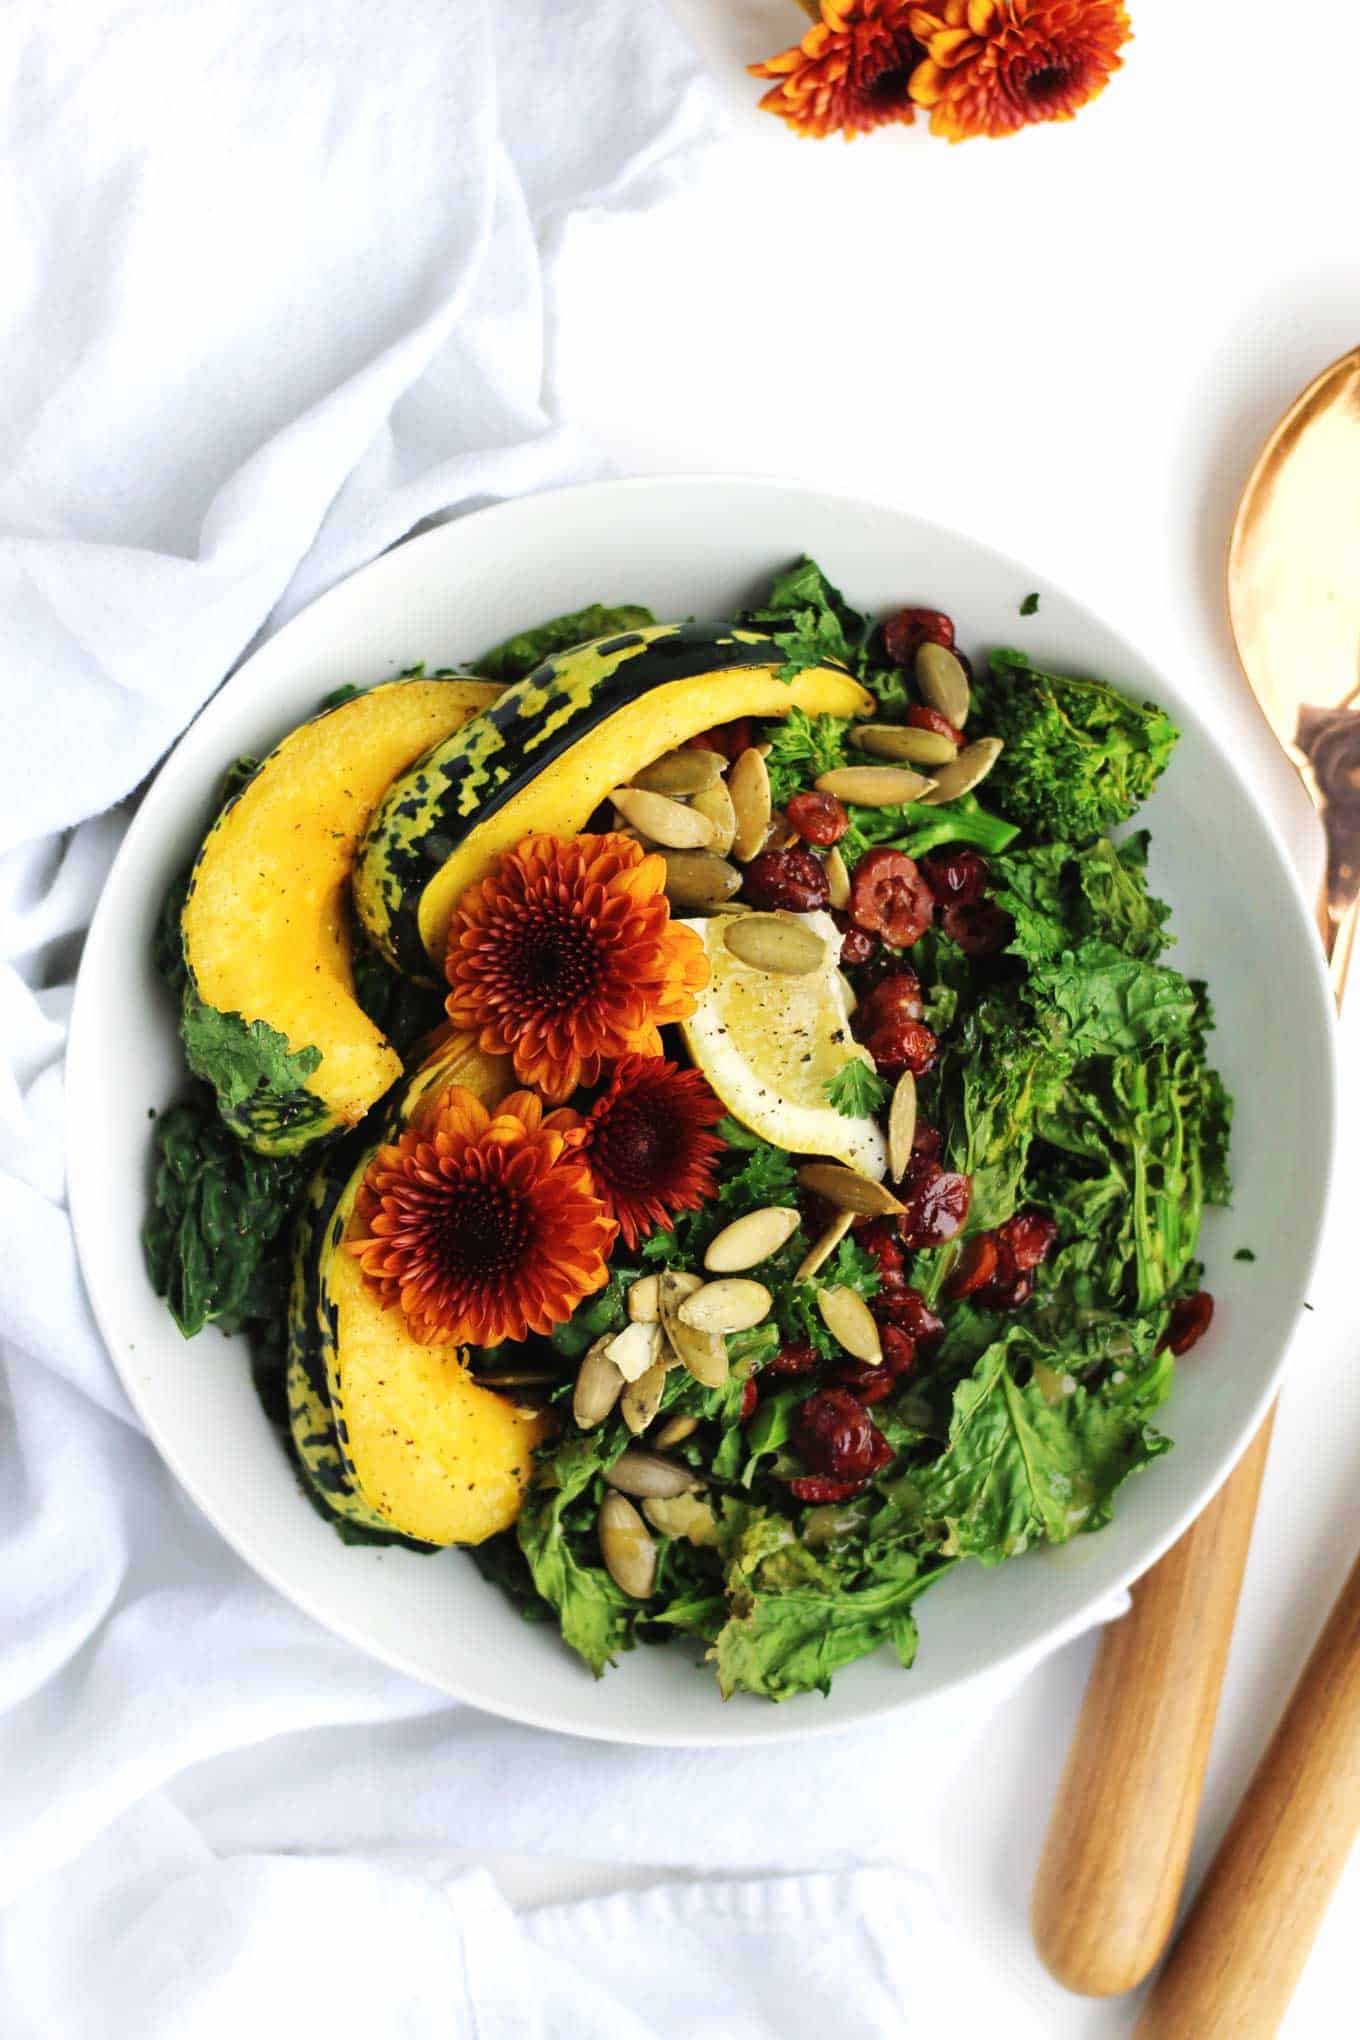 A photo of a wilted greens salad with slices of roasted squash, orange flowers, lemon slice, pepitas, and cranberries.